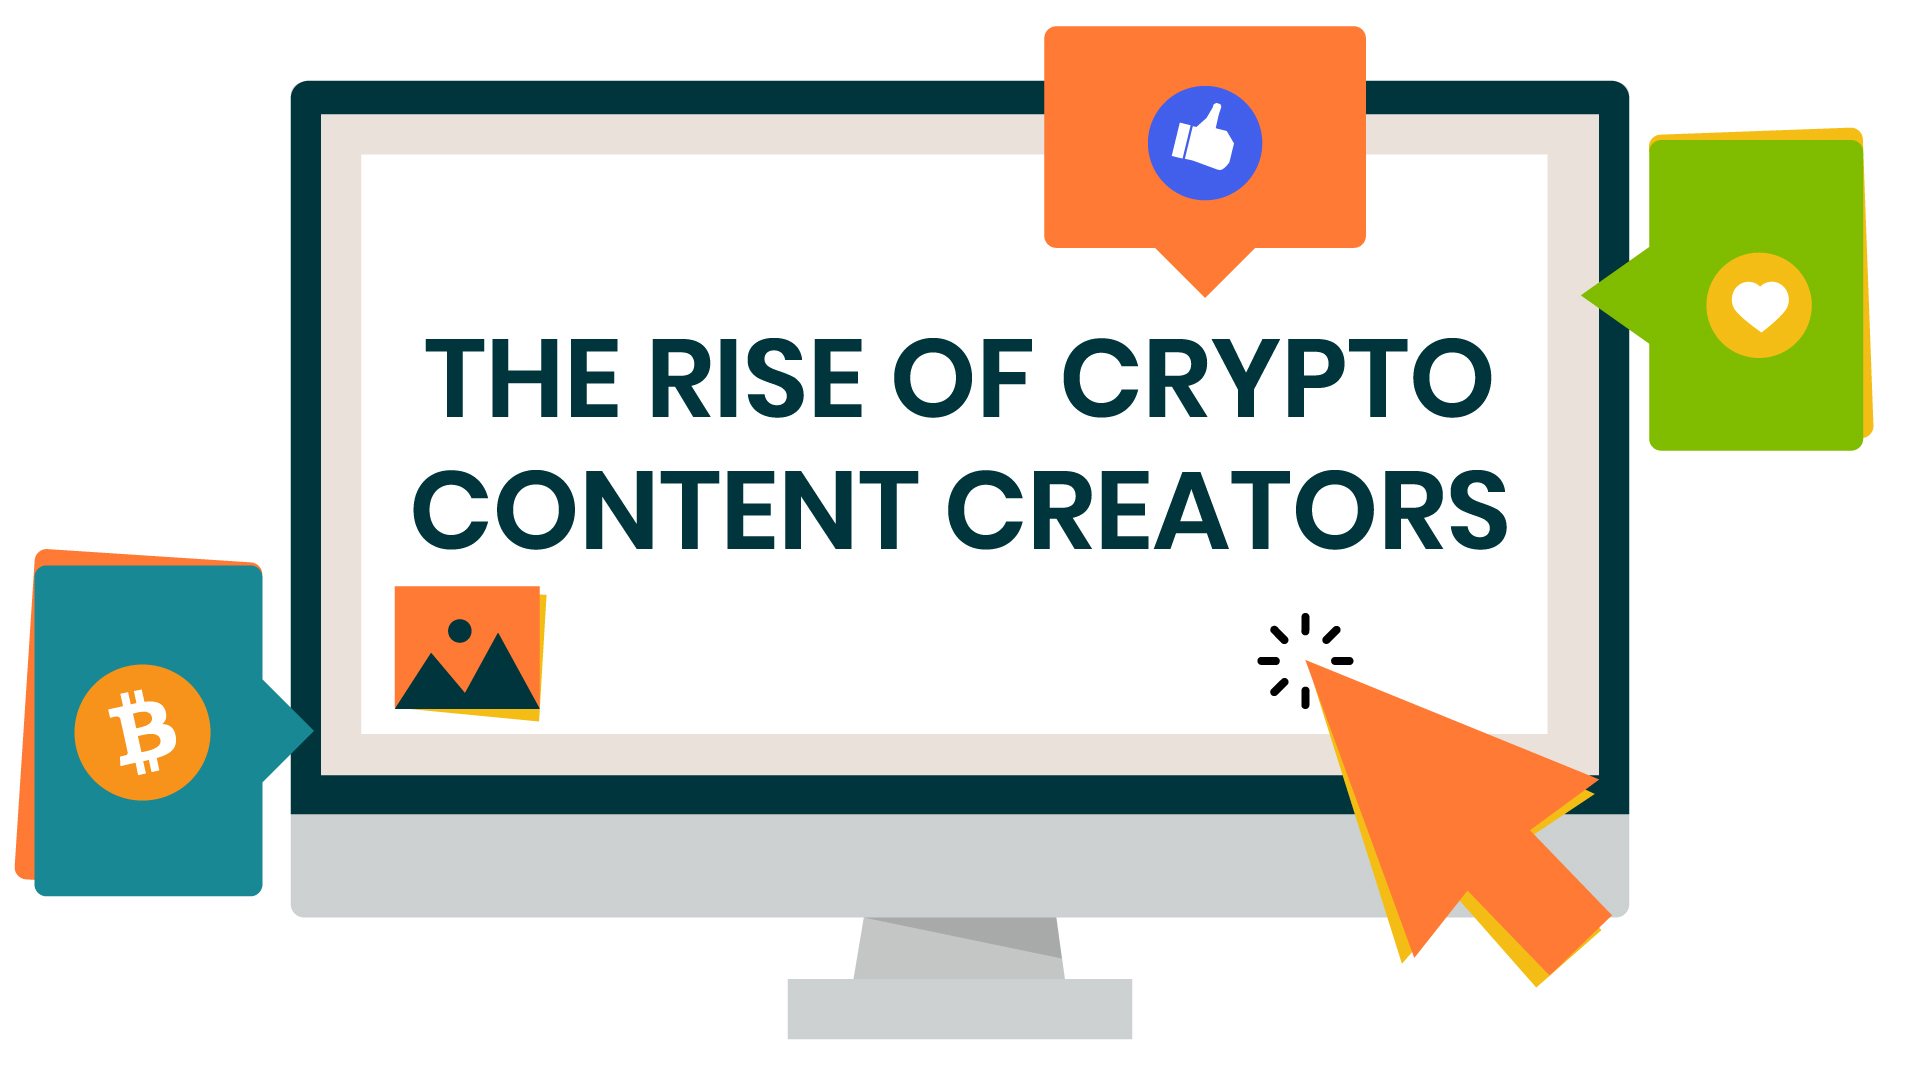 The rise of crypto content creators: How they are shaping the blockchain industry